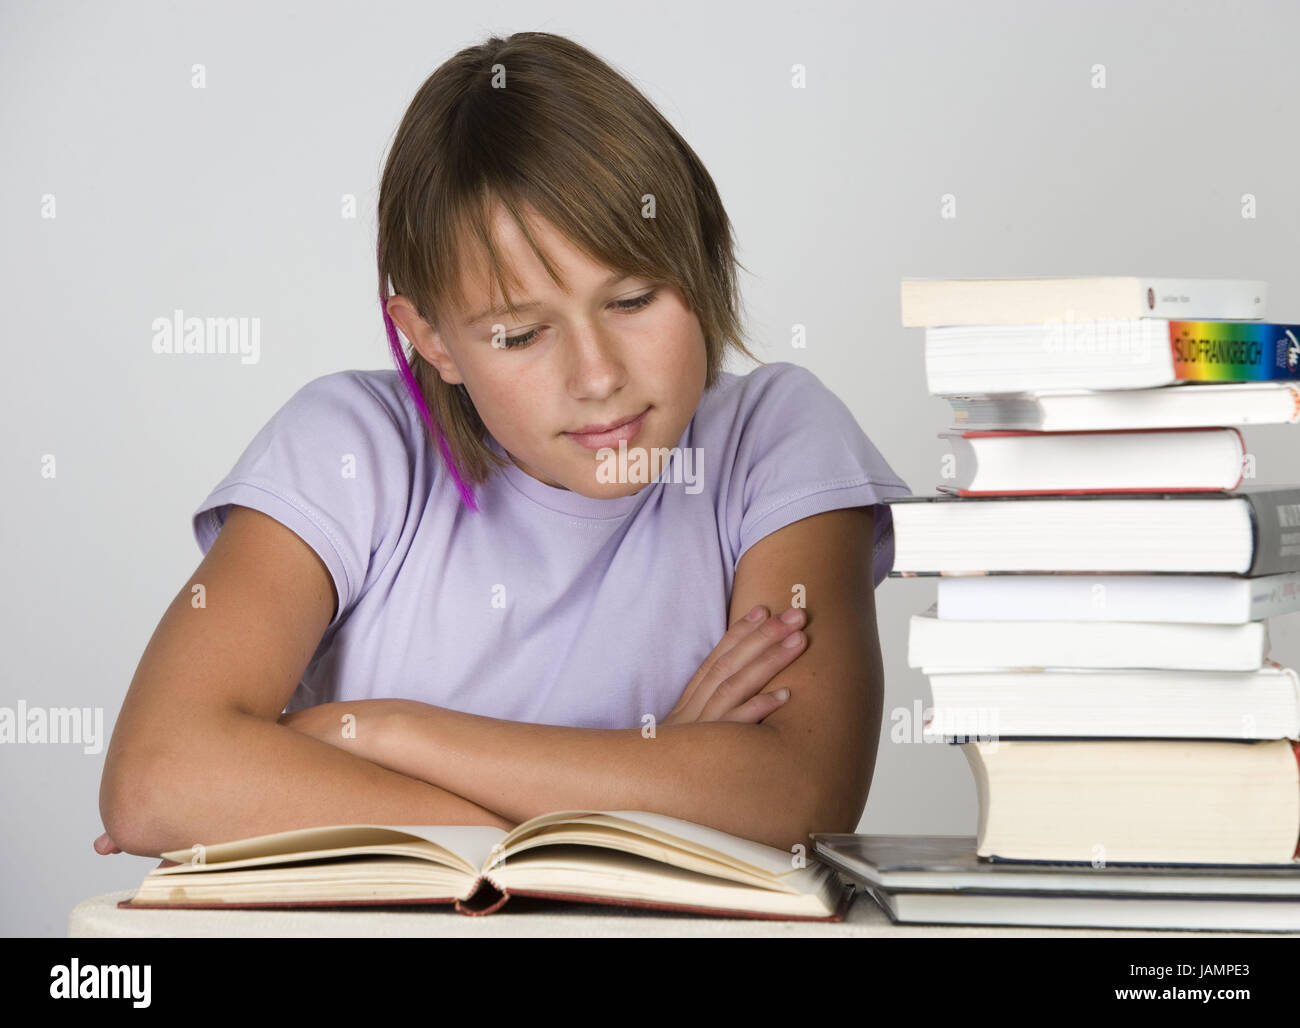 Girls,brown-haired,book batch,read,books smile,batch,deepens,learn,studio,knowledge,education,intelligence,stacked,about one another,youth,schoolgirl,grinds,school books,diligence,ambition, Stock Photo